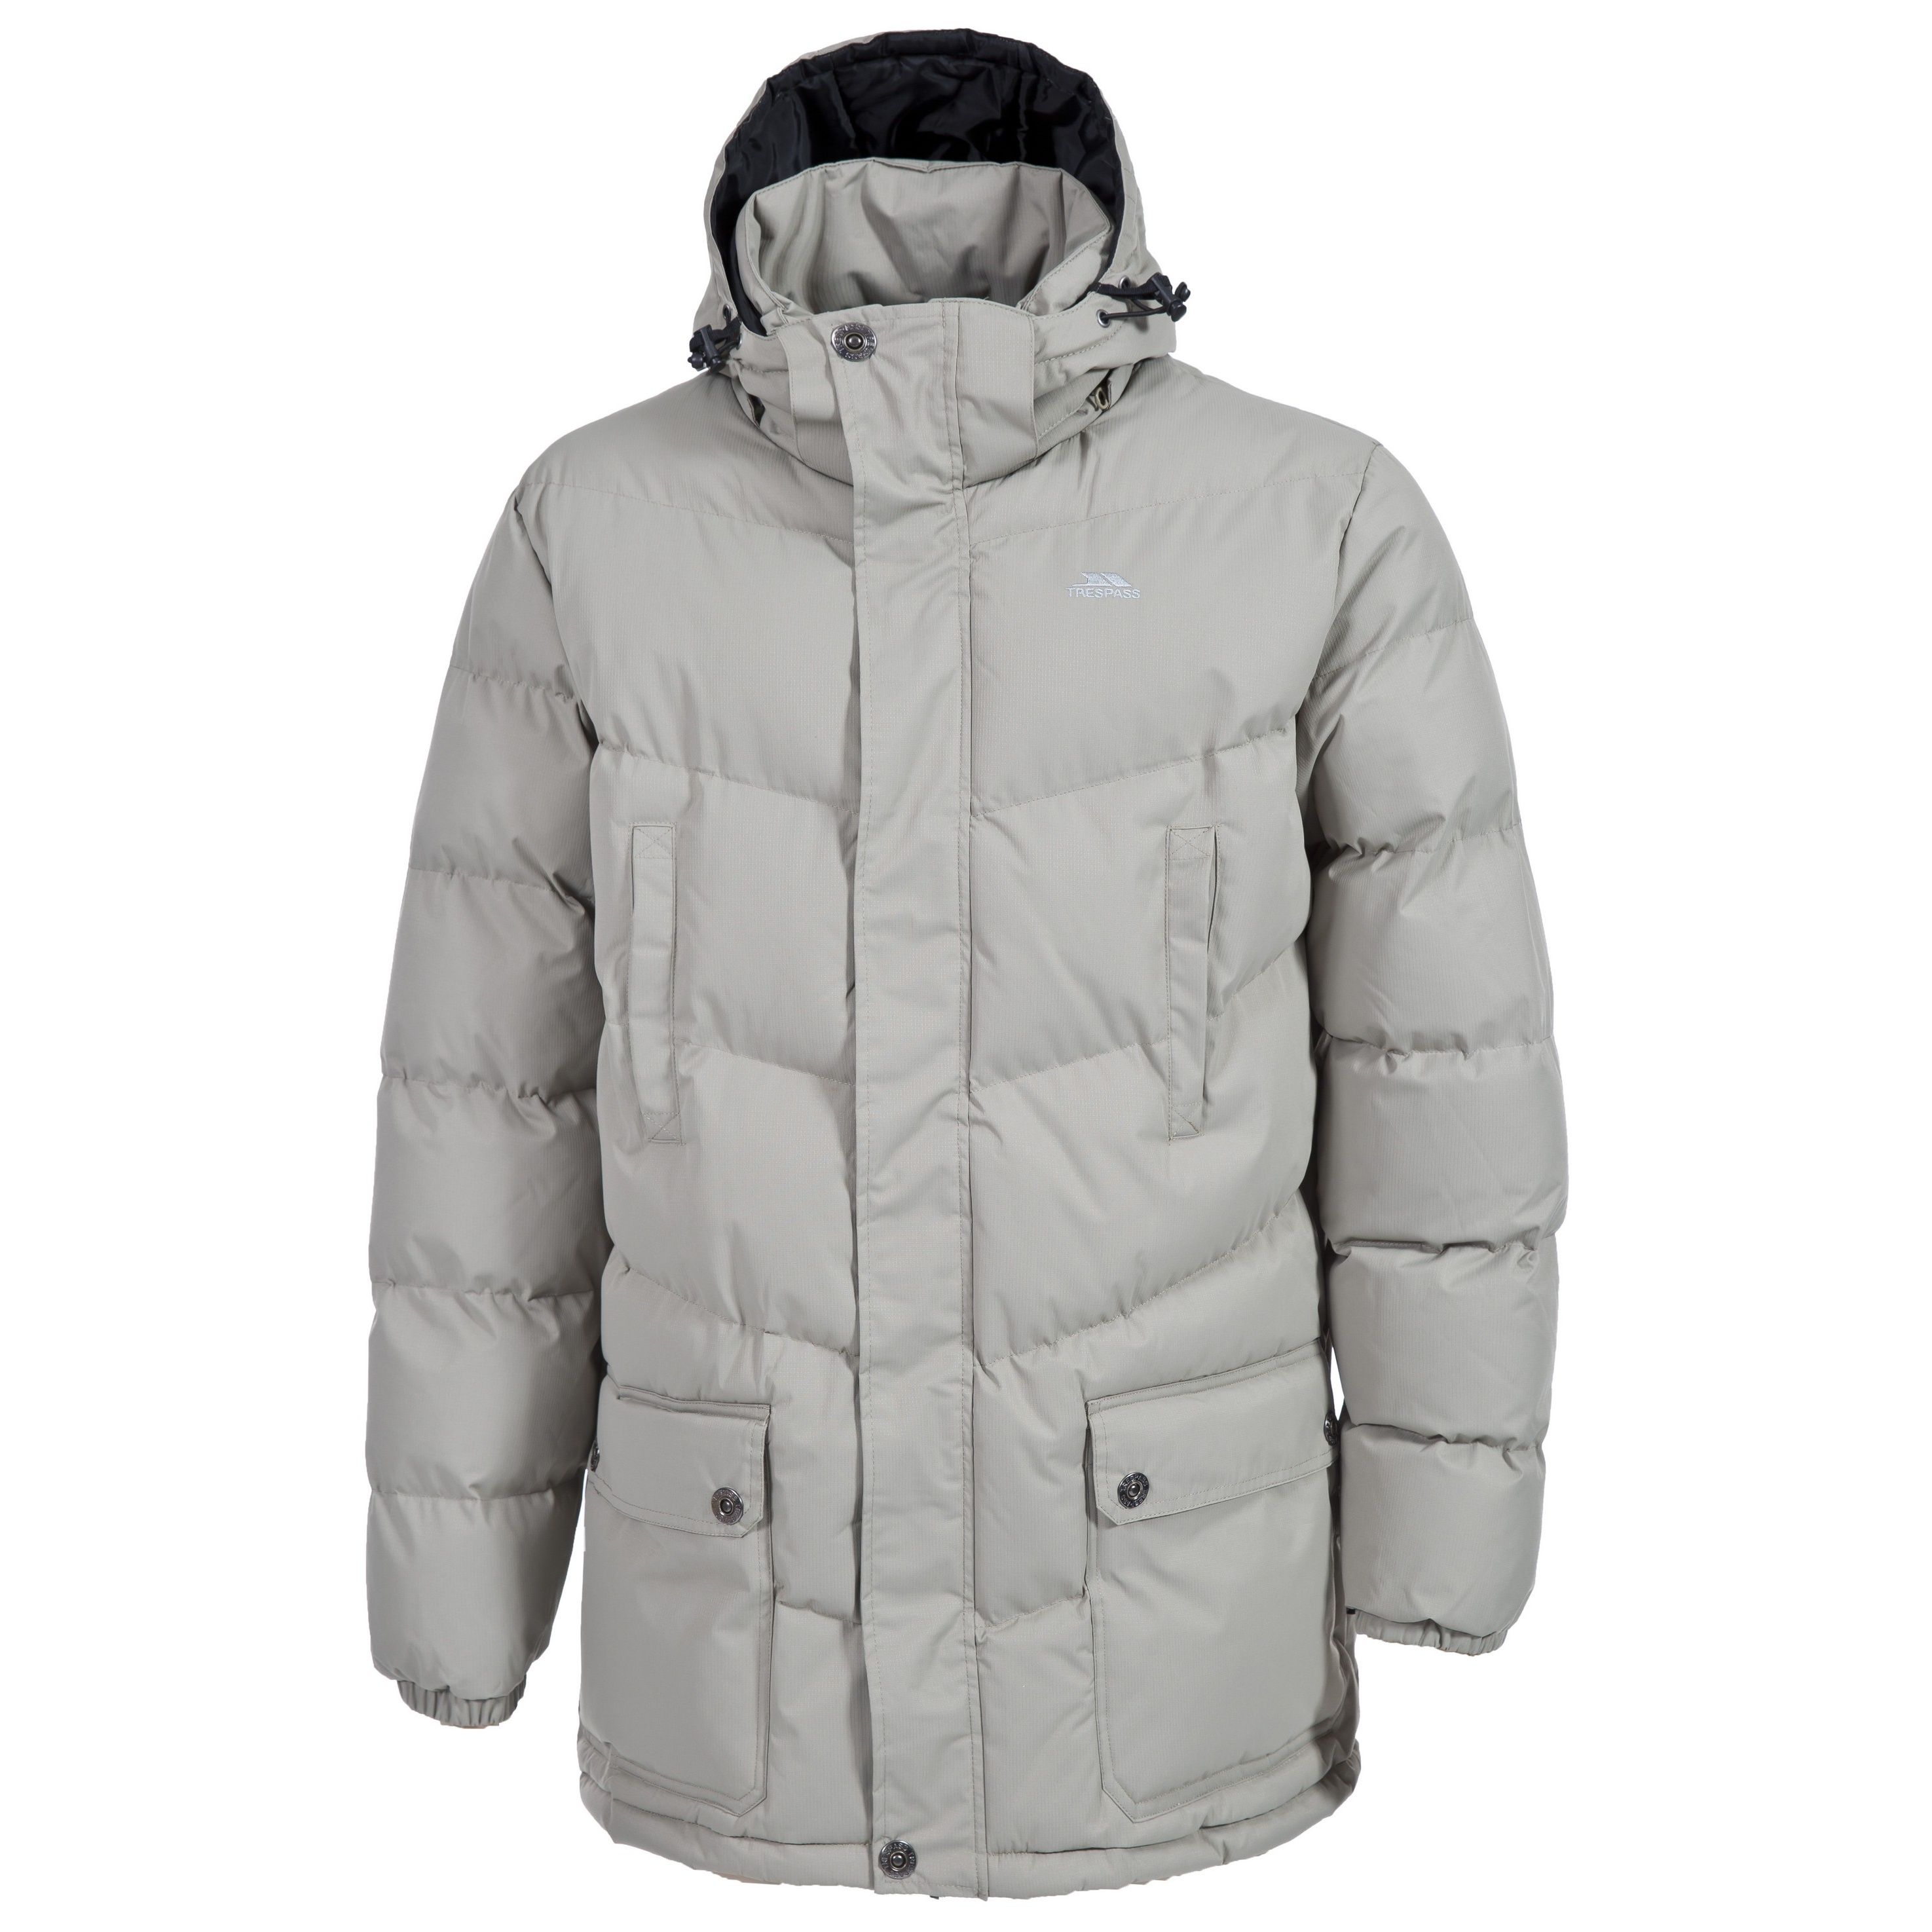 Mens padded jacket. Adjustable zip off hood. 2 chest welt pockets. 2 patch pockets. Drawcord hem. Elasticated cuff. Shell: 100% Polyester, Lining: 100% Polyester, Padding: 100% Polyester.